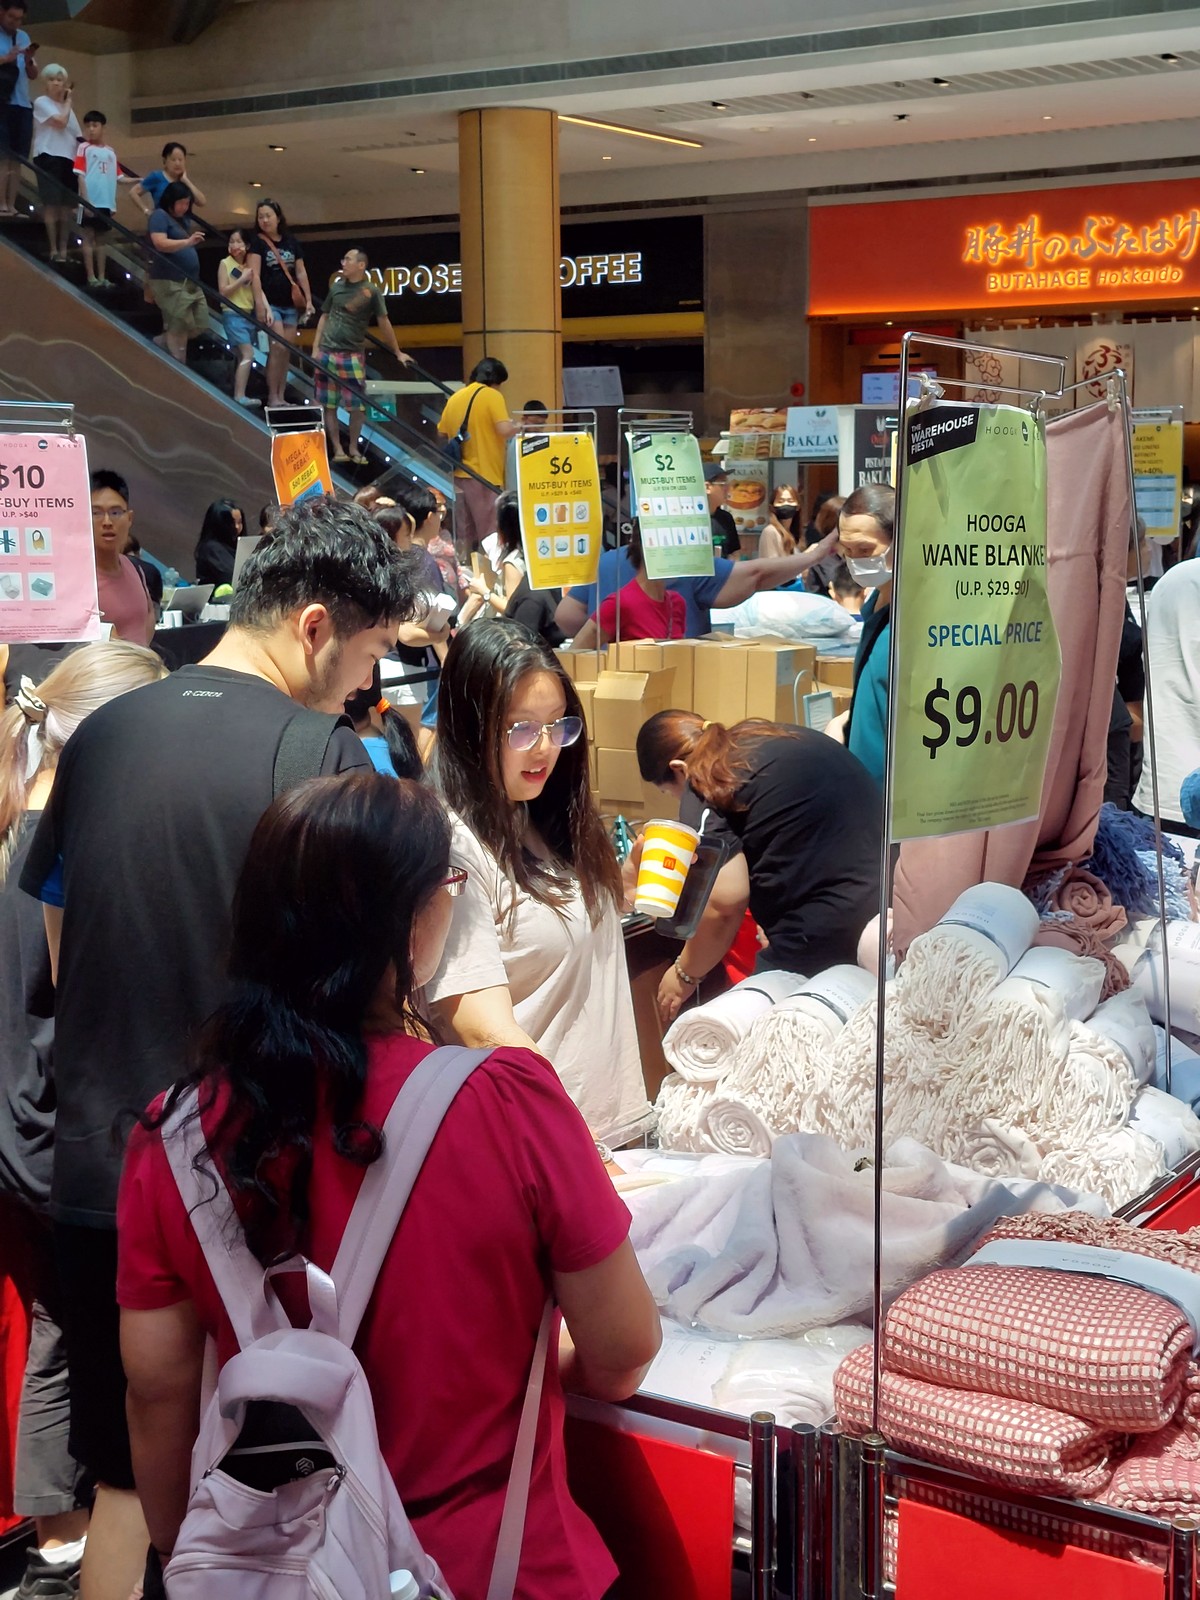 IMG_1024 20-26 Nov 2023: Bedding & Home Décor Warehouse Sale! Up to 70% OFF+Extra 50% Discounts on HOOGA, AKEMI & CANNON